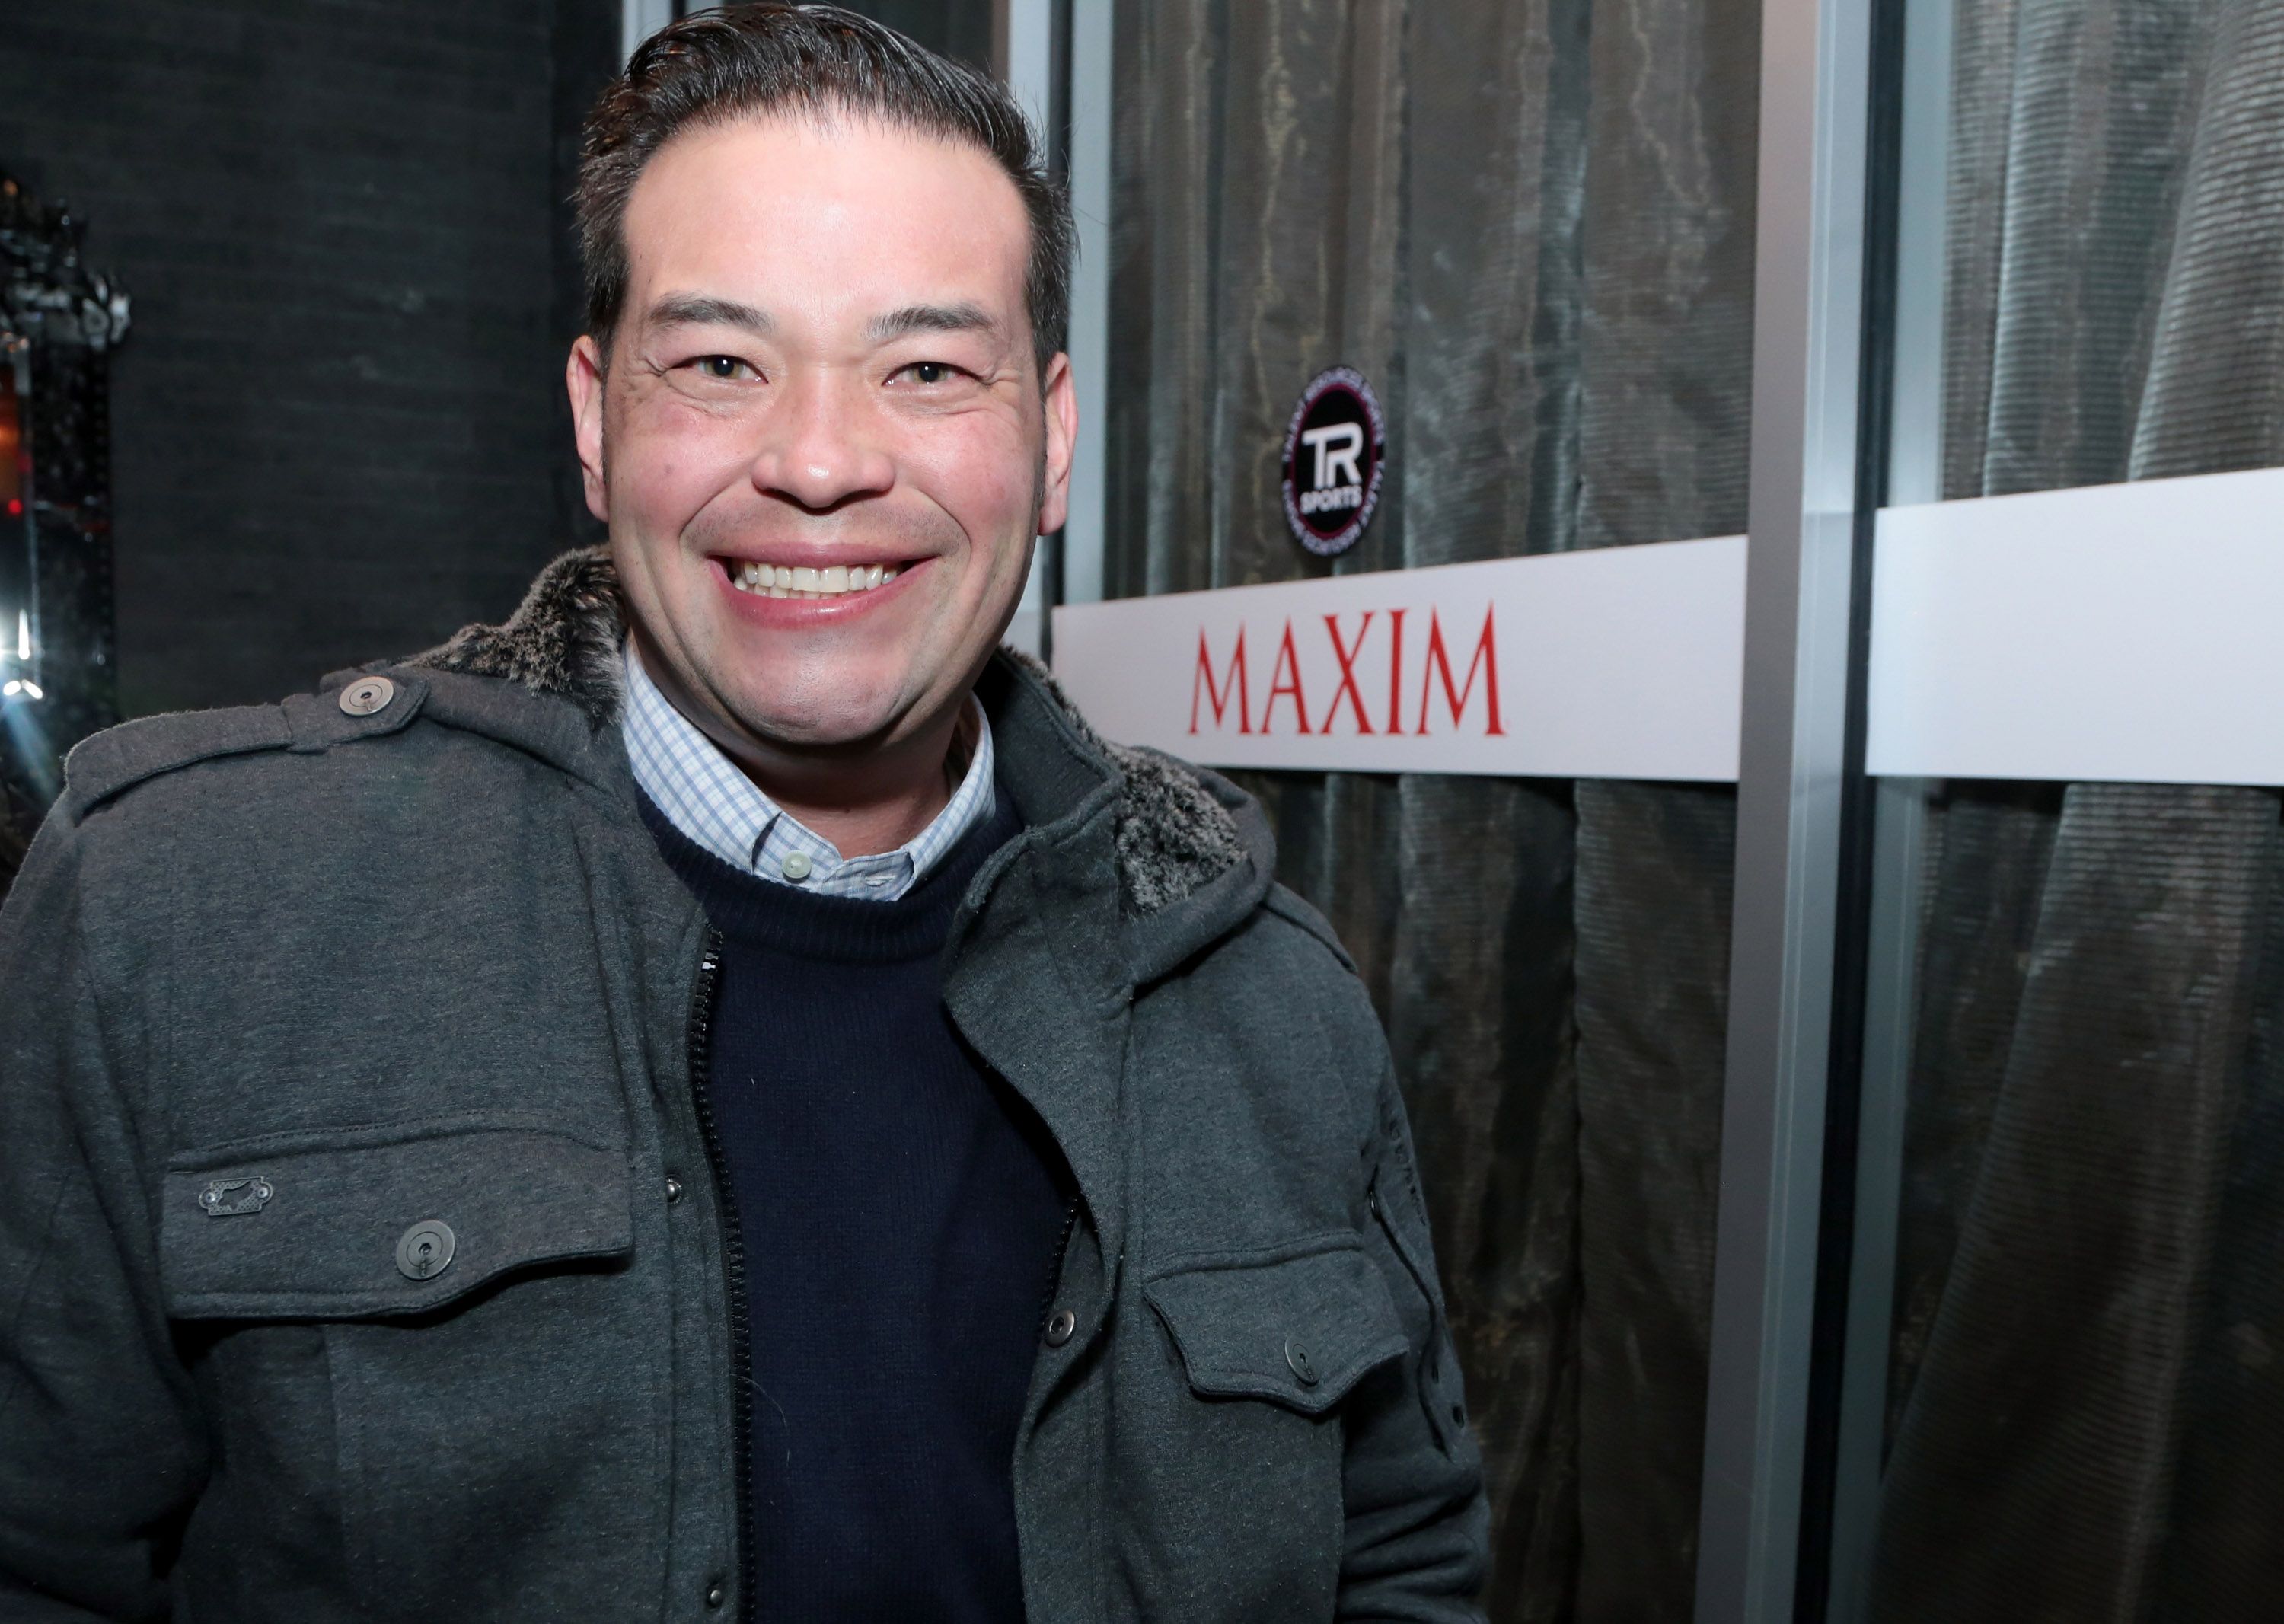 Jon Gosselin at Talent Resources Sports presents Maxim "Big Game Weekend" at ESPACE on January 31, 2014, in New York City | Photo: Anna Webber/Getty Images